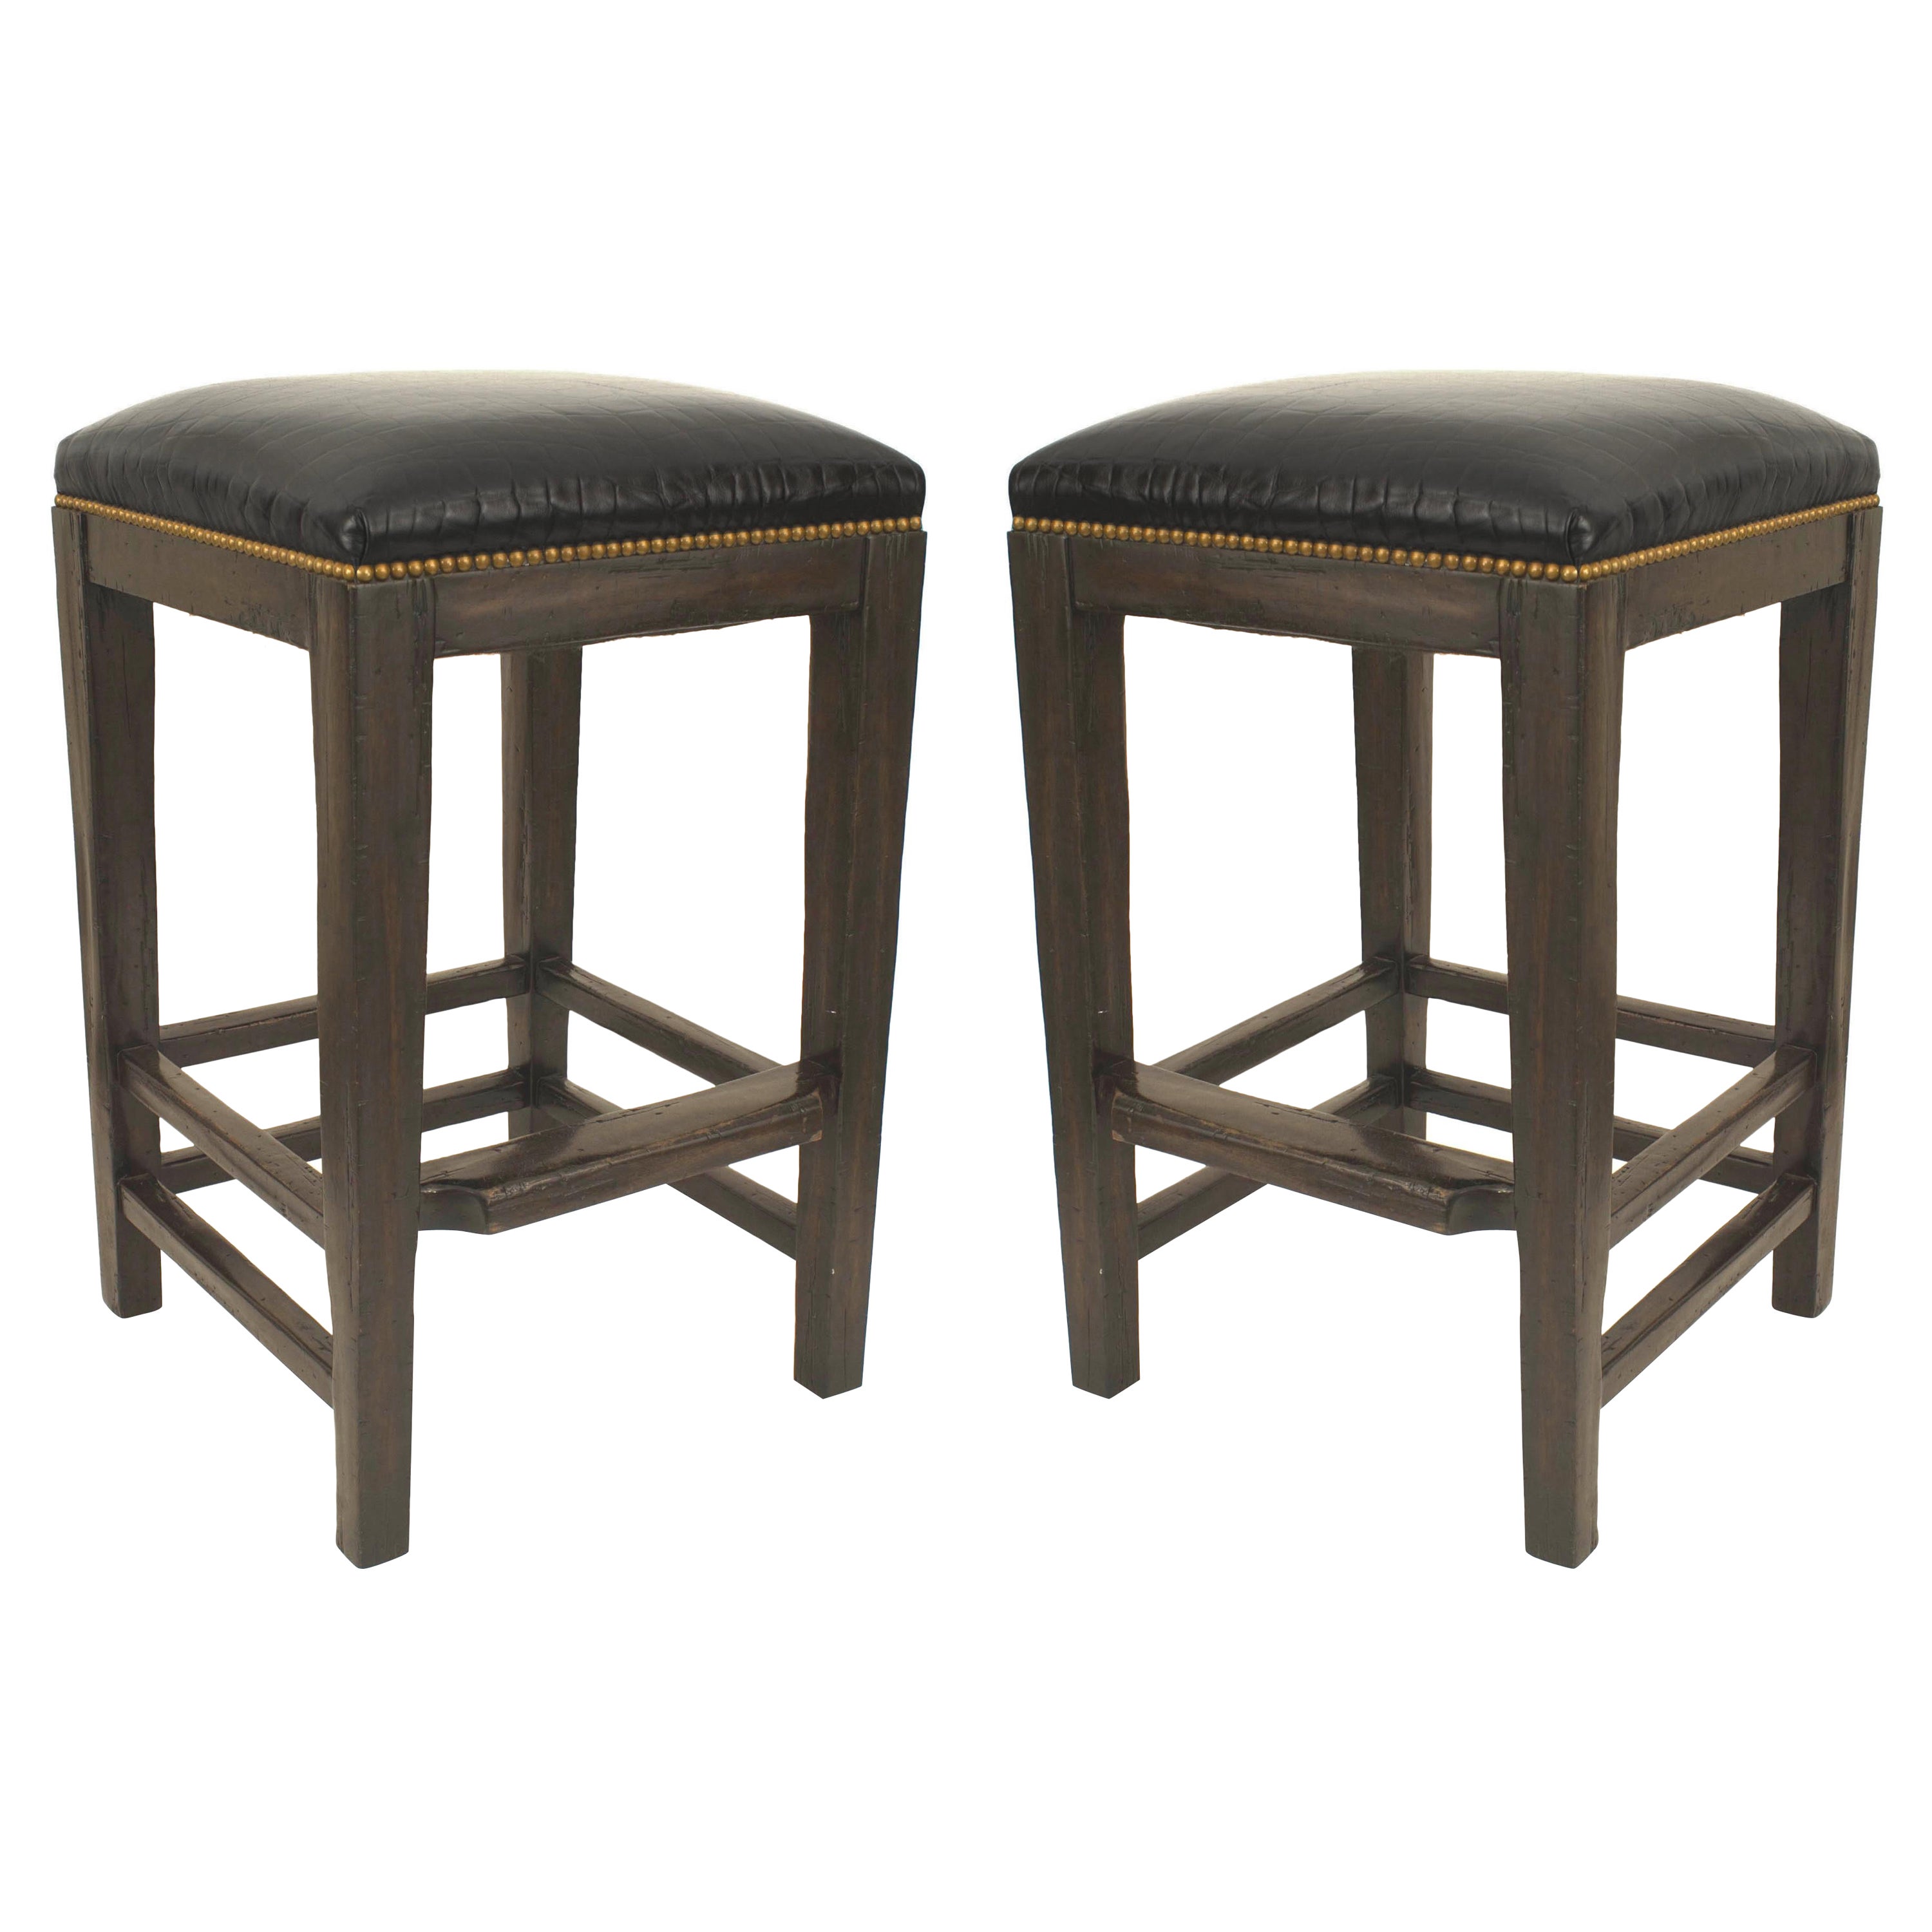 Contemporary Post-War Leather Bar Stools